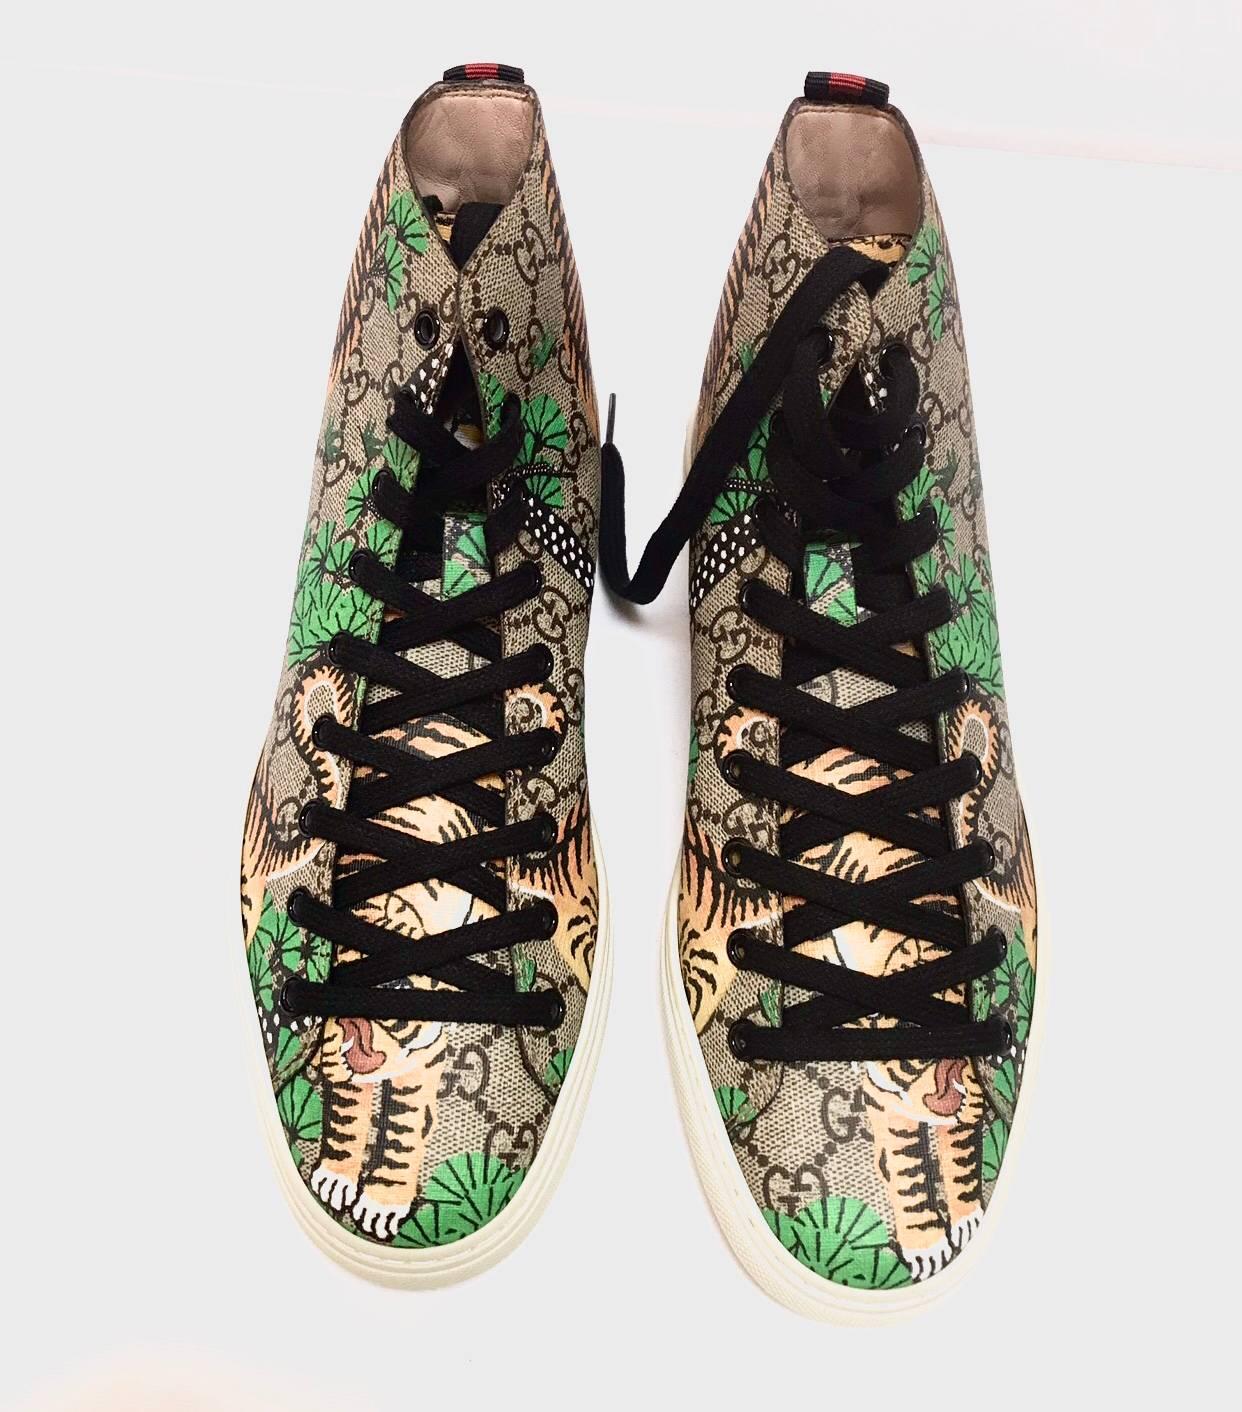 GUCCI 
Season Fw 17

Gucci is approaching the oriental world proposing a beige / ebony GG Supreme sneakers with patterned print with tigers. Rubber sole.
NEW CONDITION 
PACKAGING: ORIGINAL BOX AND DUST BAG 
DELIVERY: DHL EXPRESS
